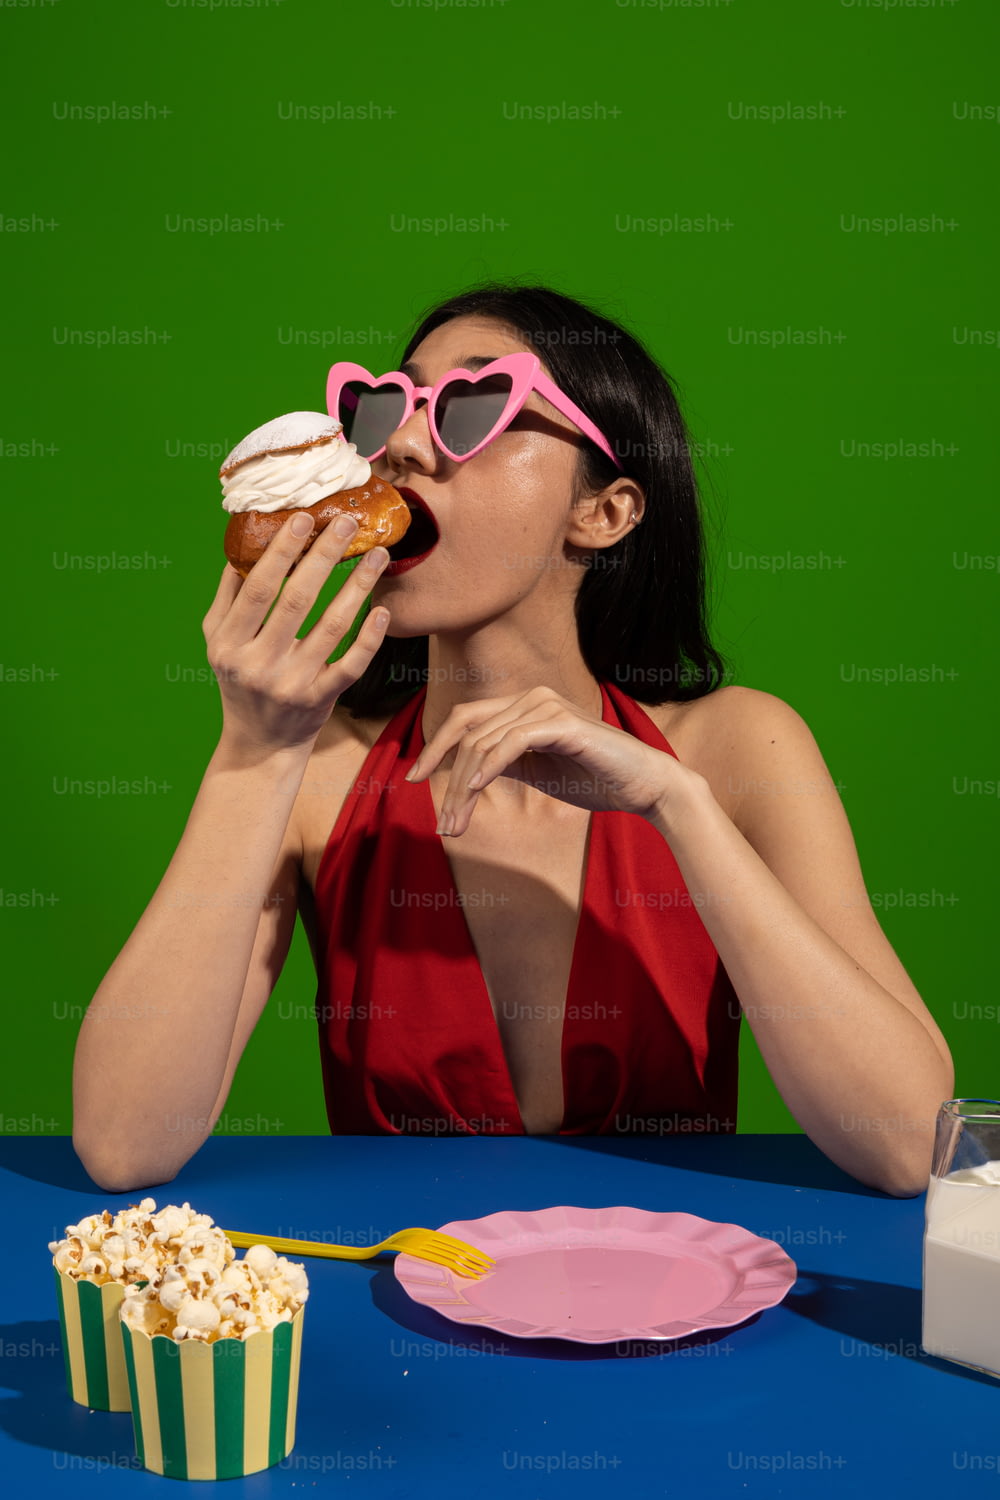 a woman in a red dress eating a cupcake